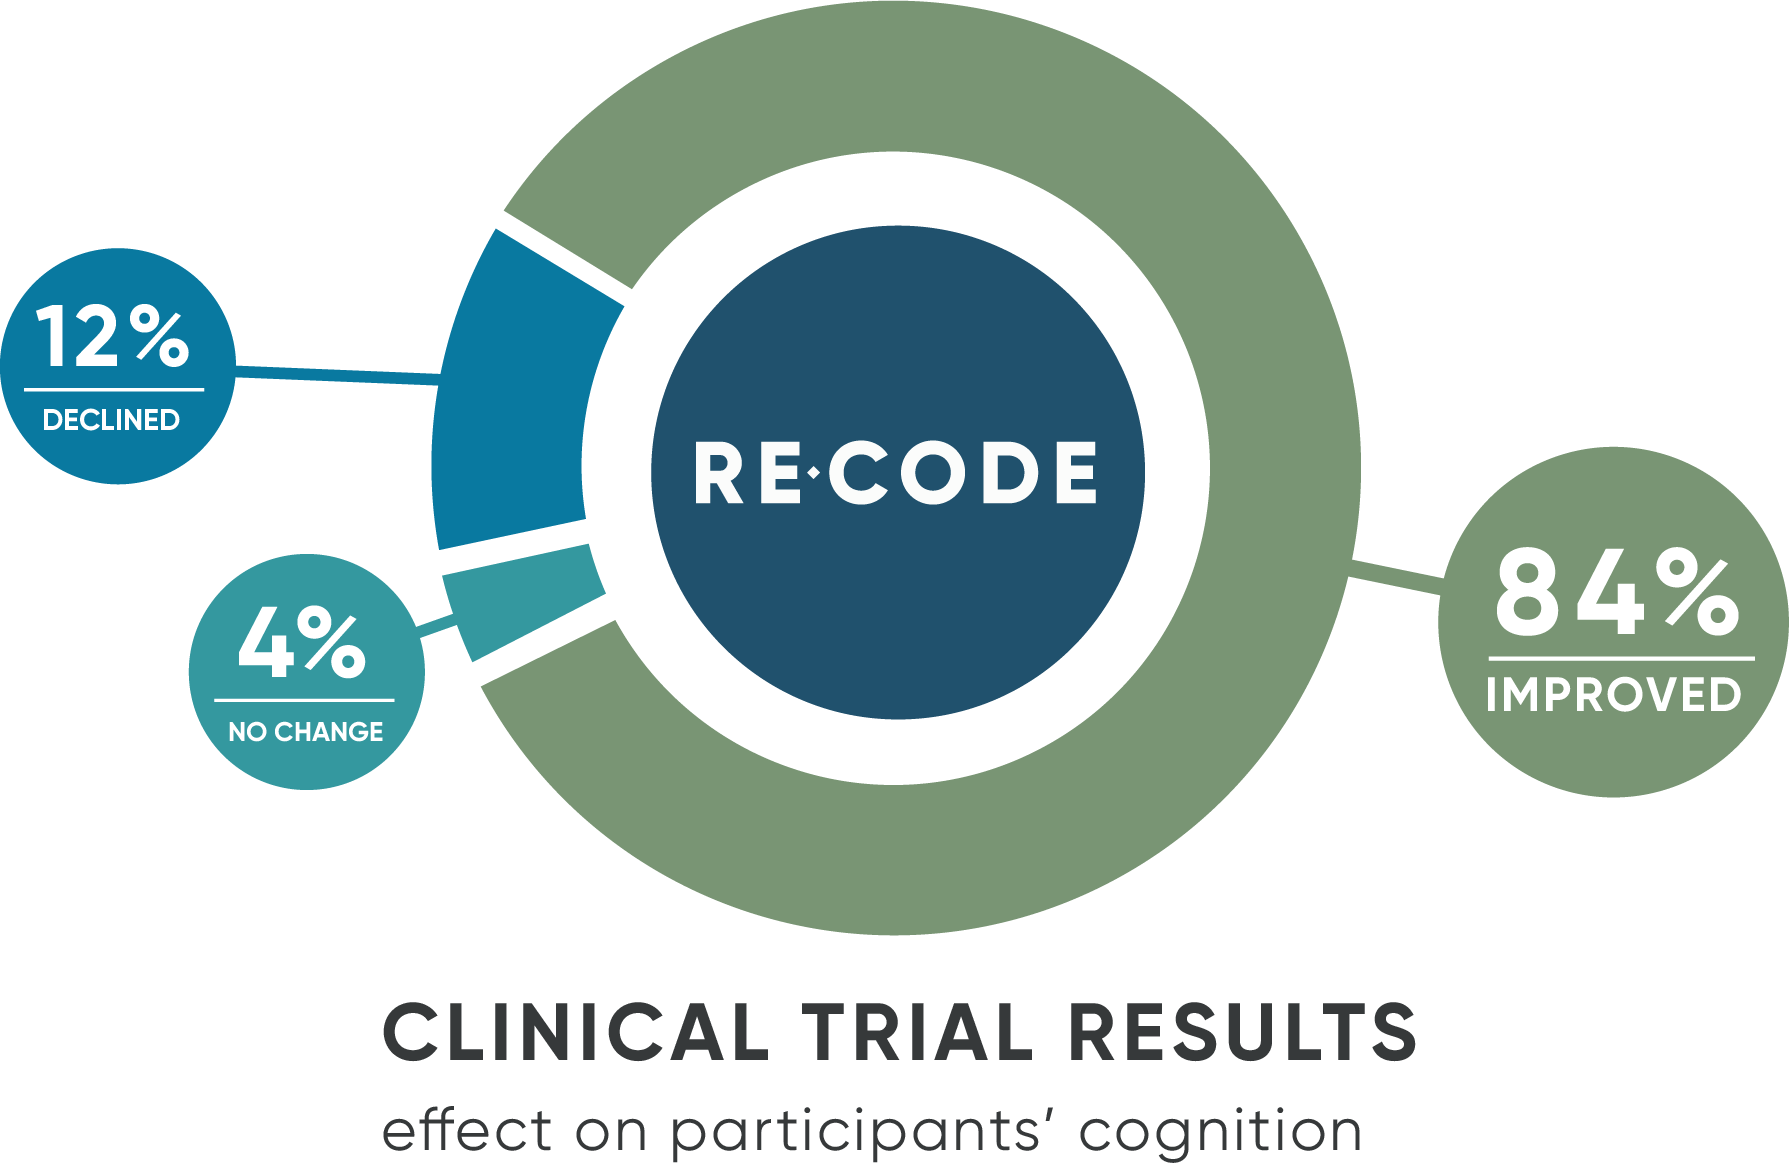 Clinical trial results effect on participants cognition shows 84 percent improved, 12 percent decline, and 4 percent stayed the same.